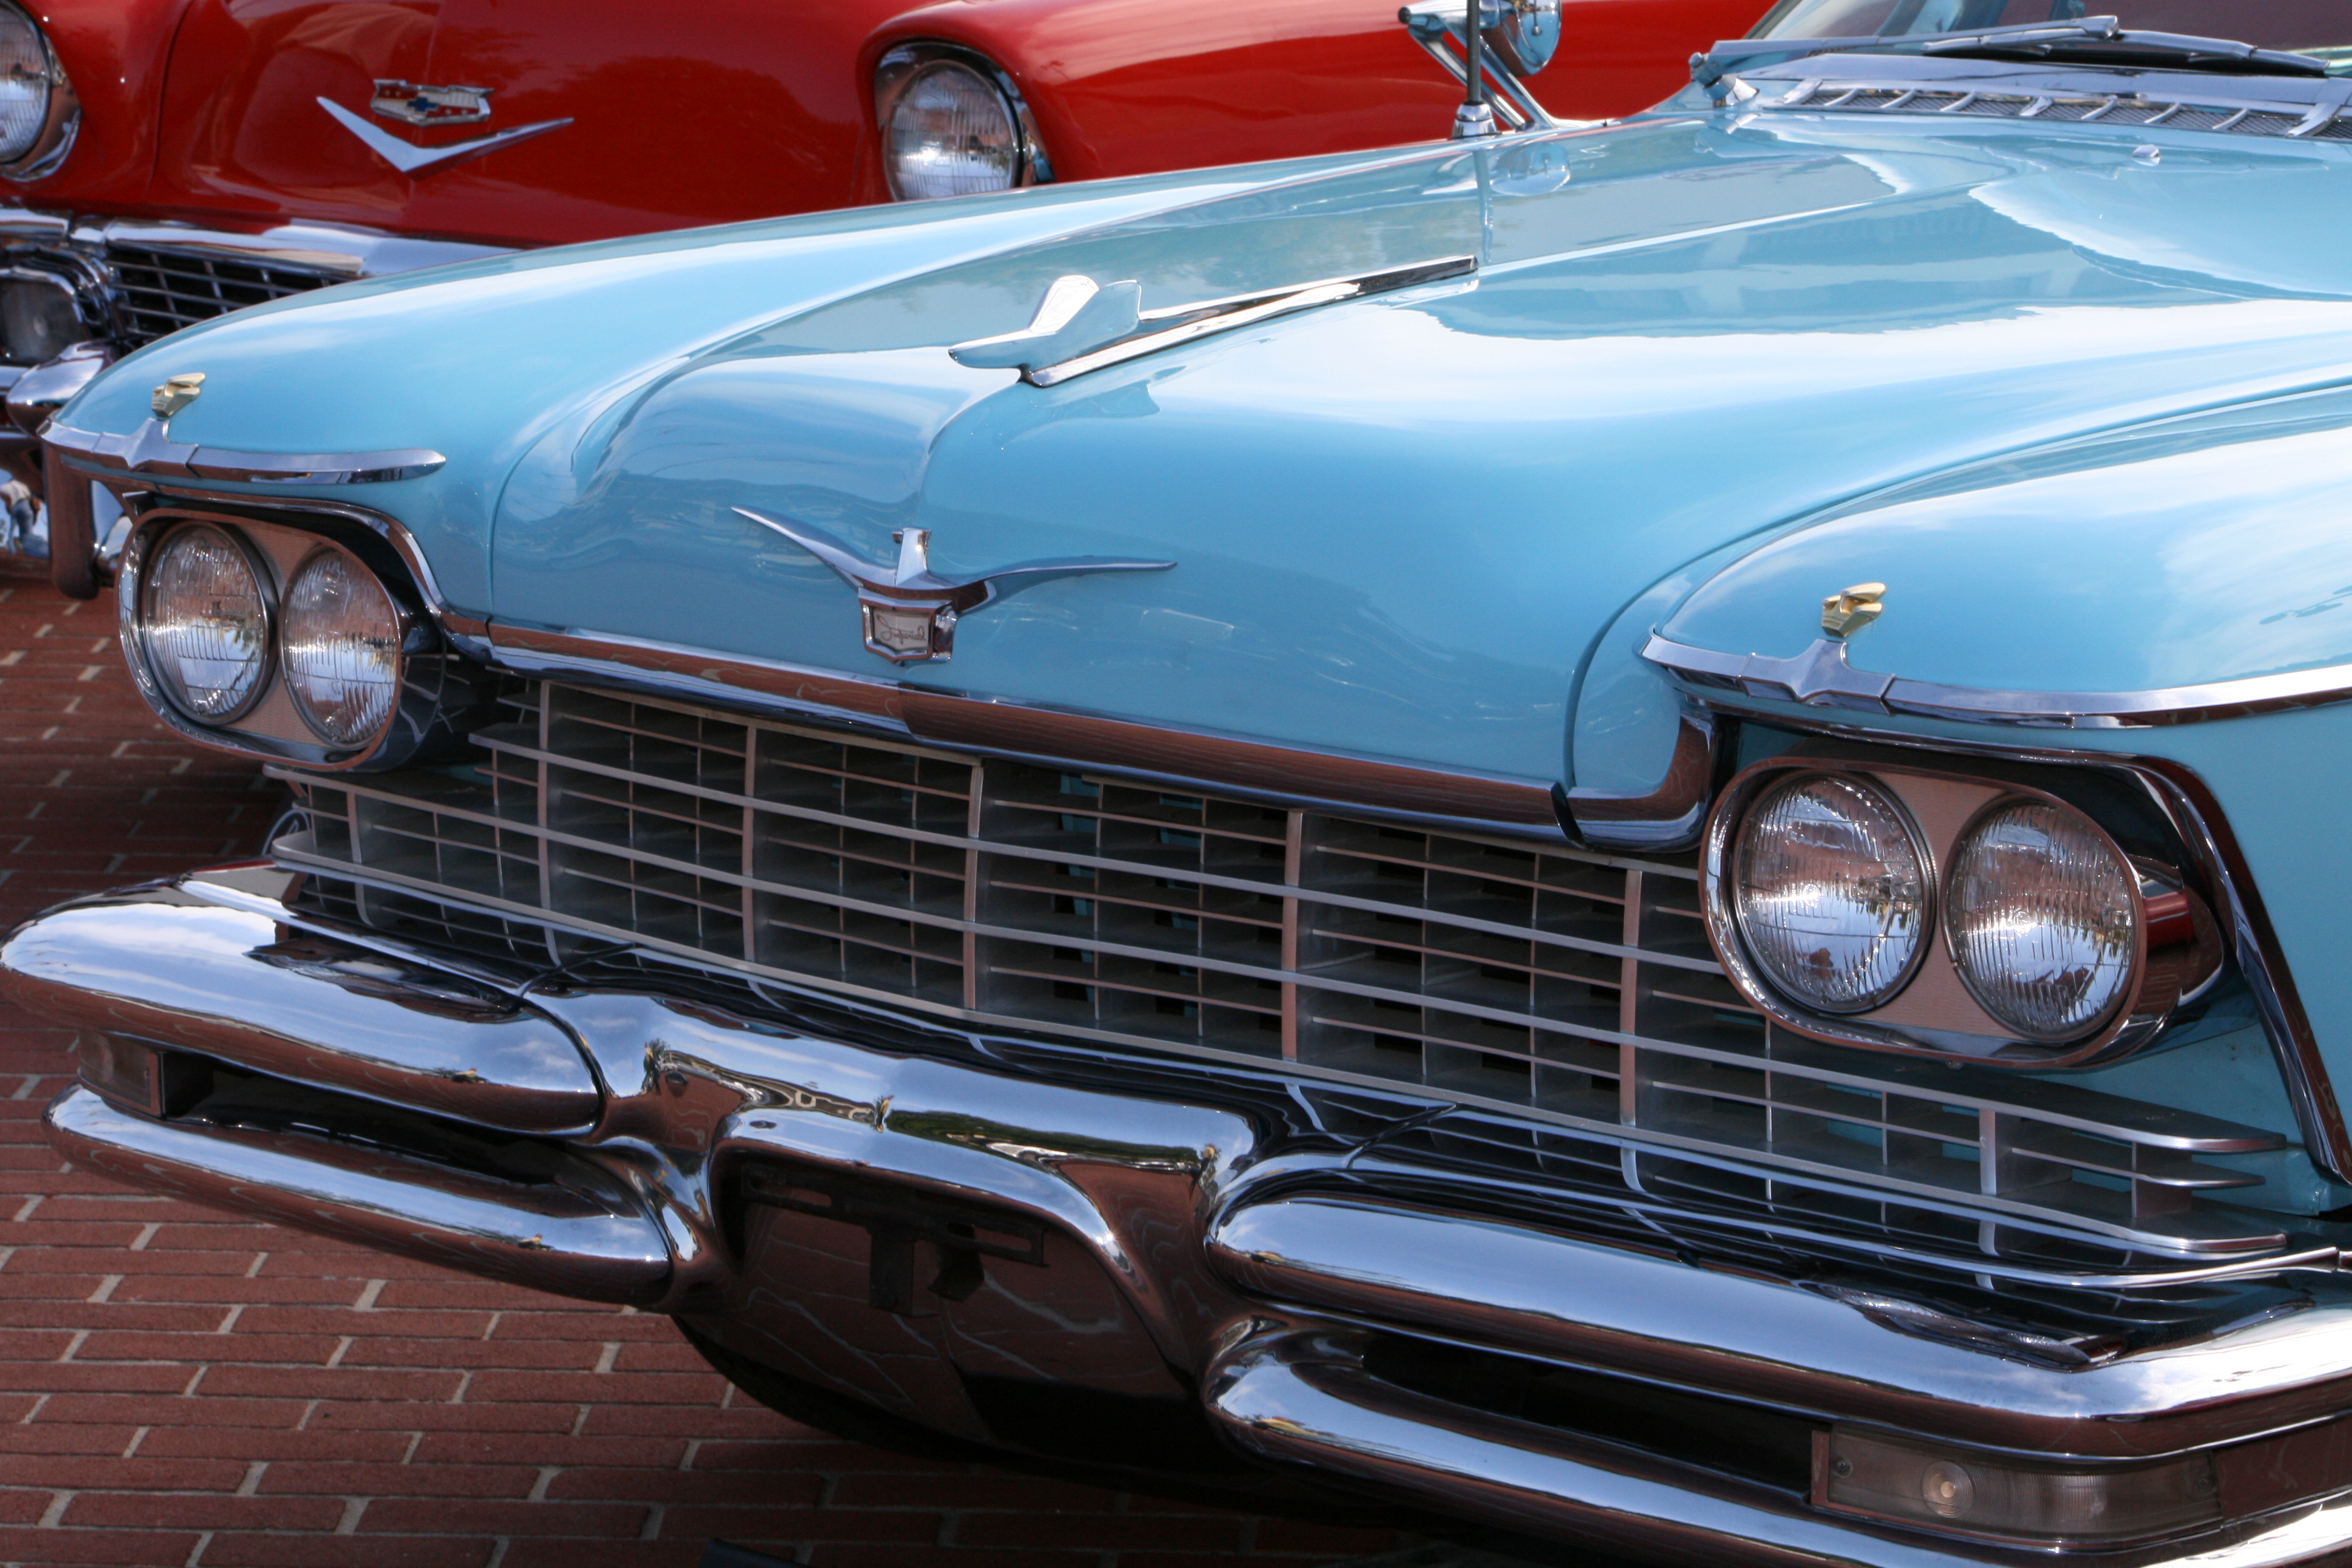 1957 Chrysler Imperial Convertible | Flickr - Photo Sharing!